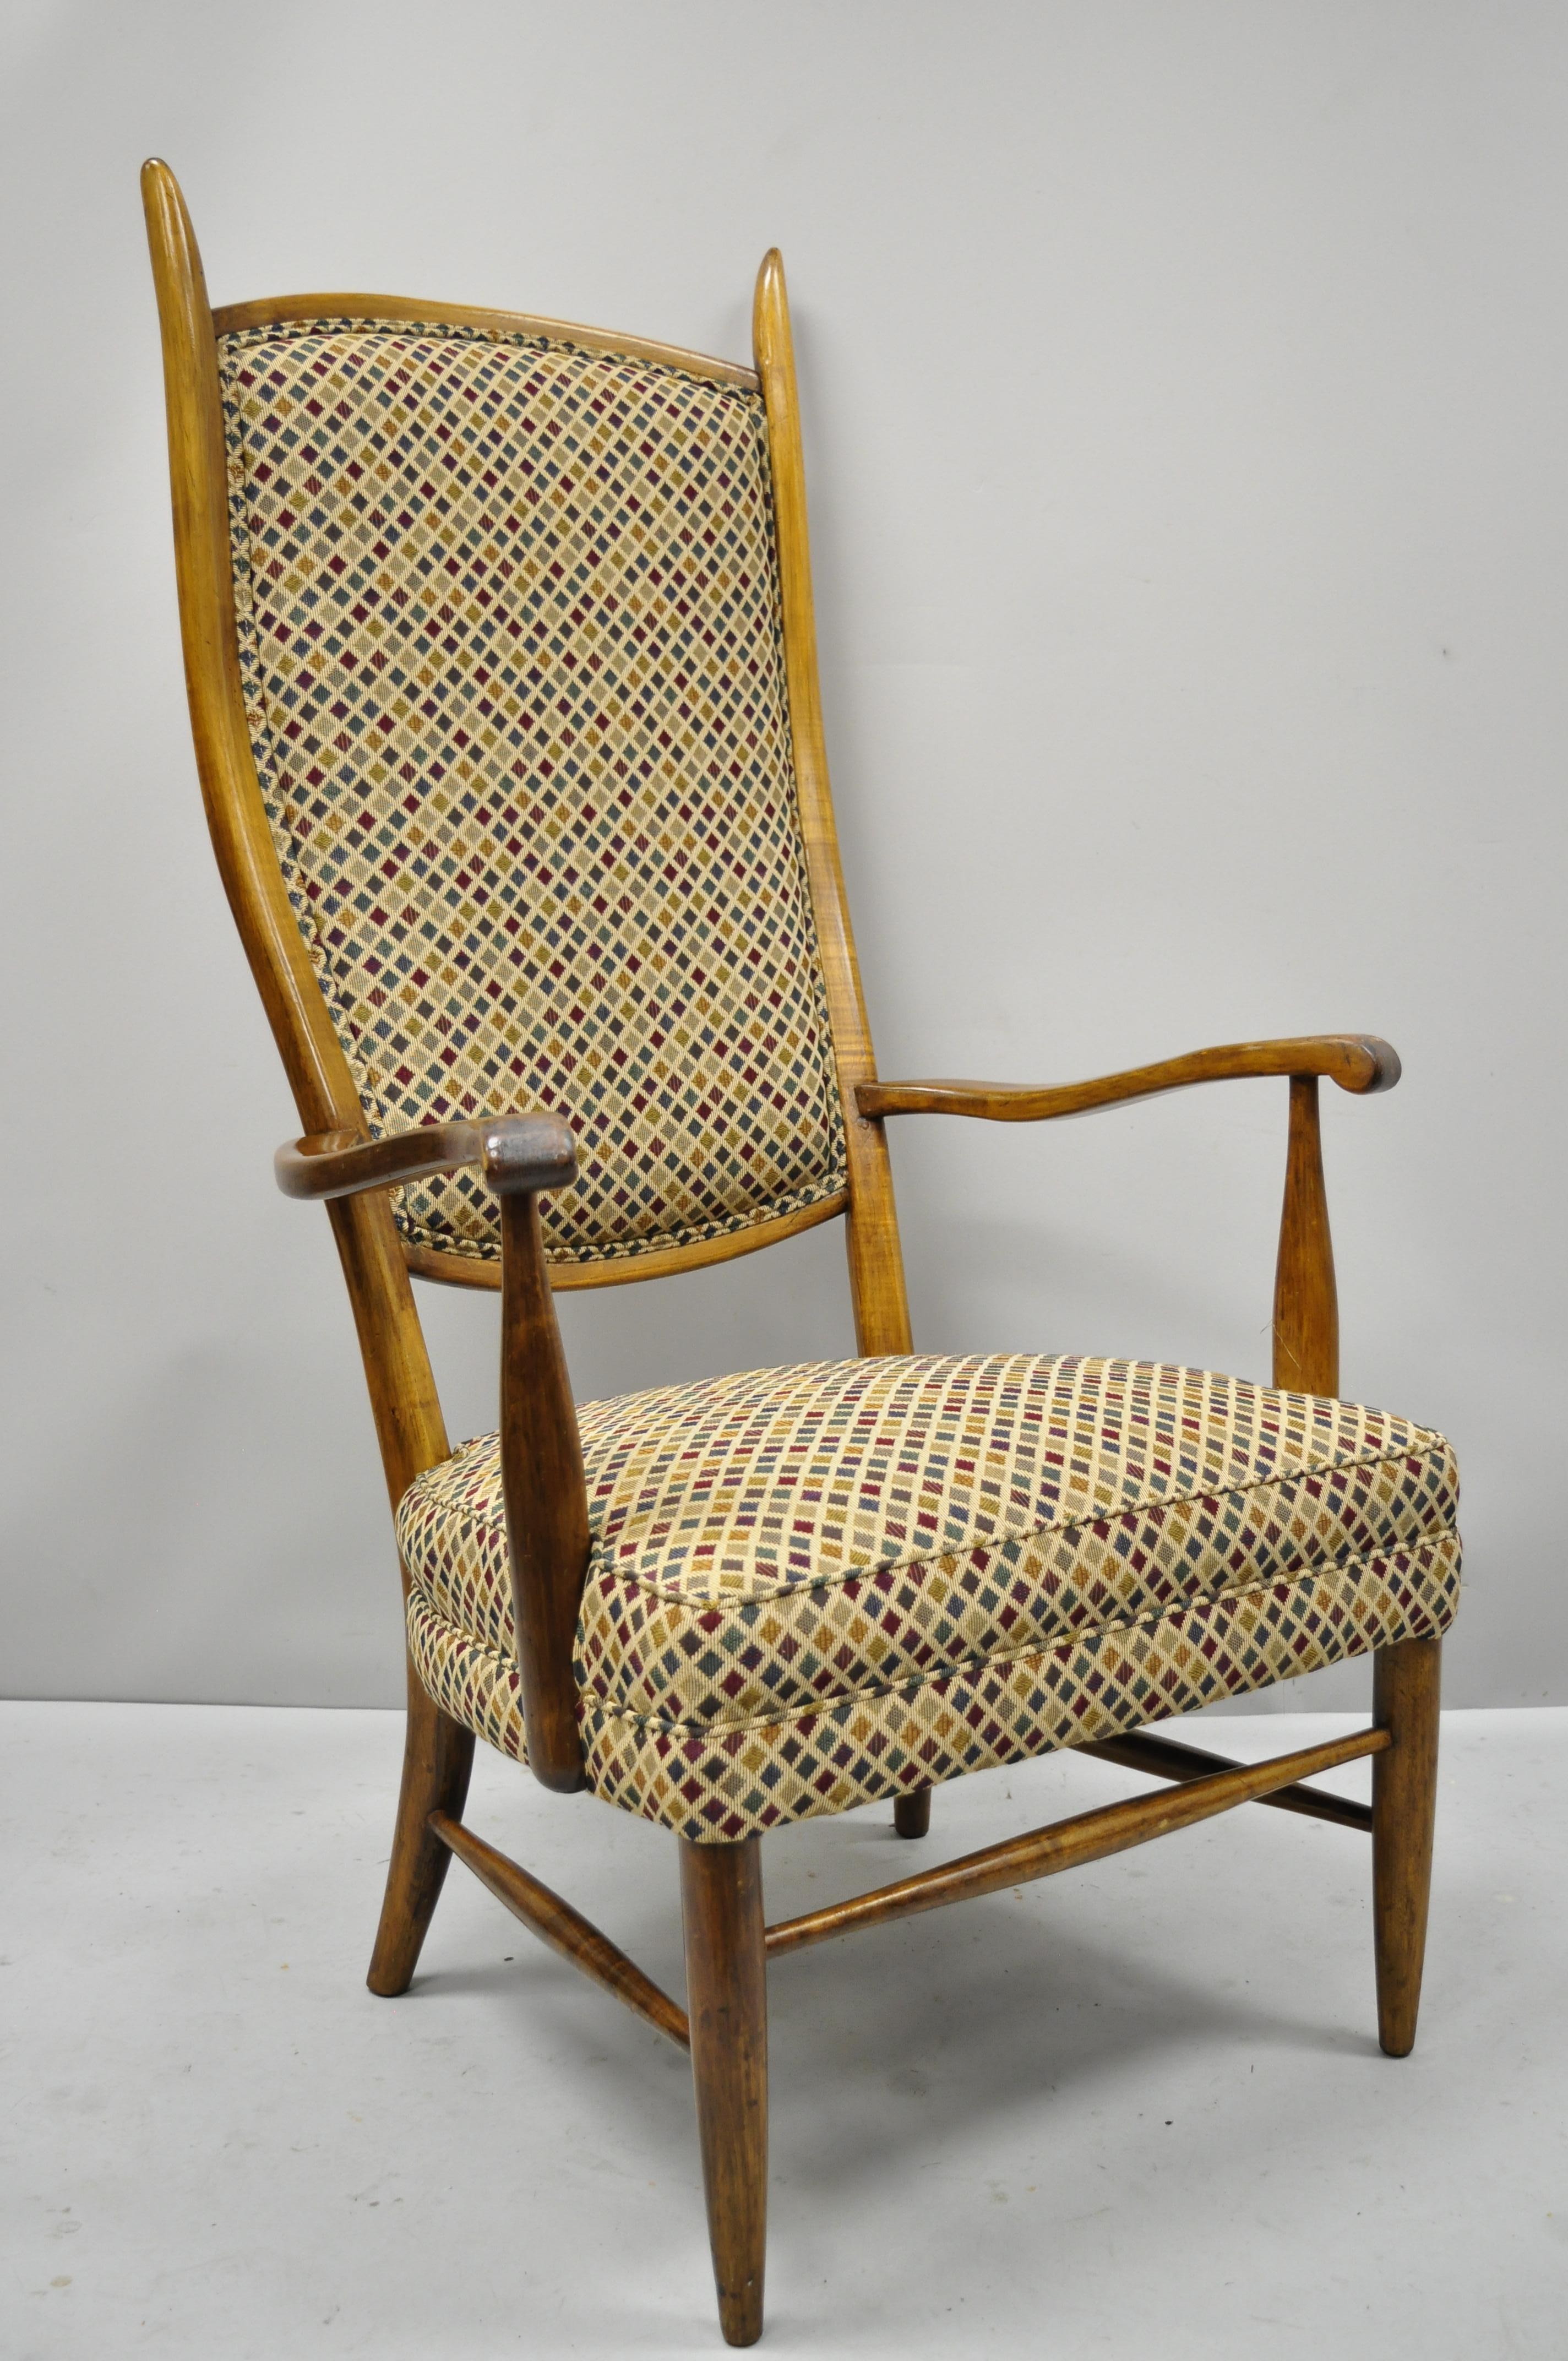 Vintage Mid-Century Modern high back maple armchair attributed to Edward Wormley. Item features solid wood frame, beautiful wood grain, tapered legs, clean modernist lines, quality craftsmanship, great style and form, circa mid-20th century.